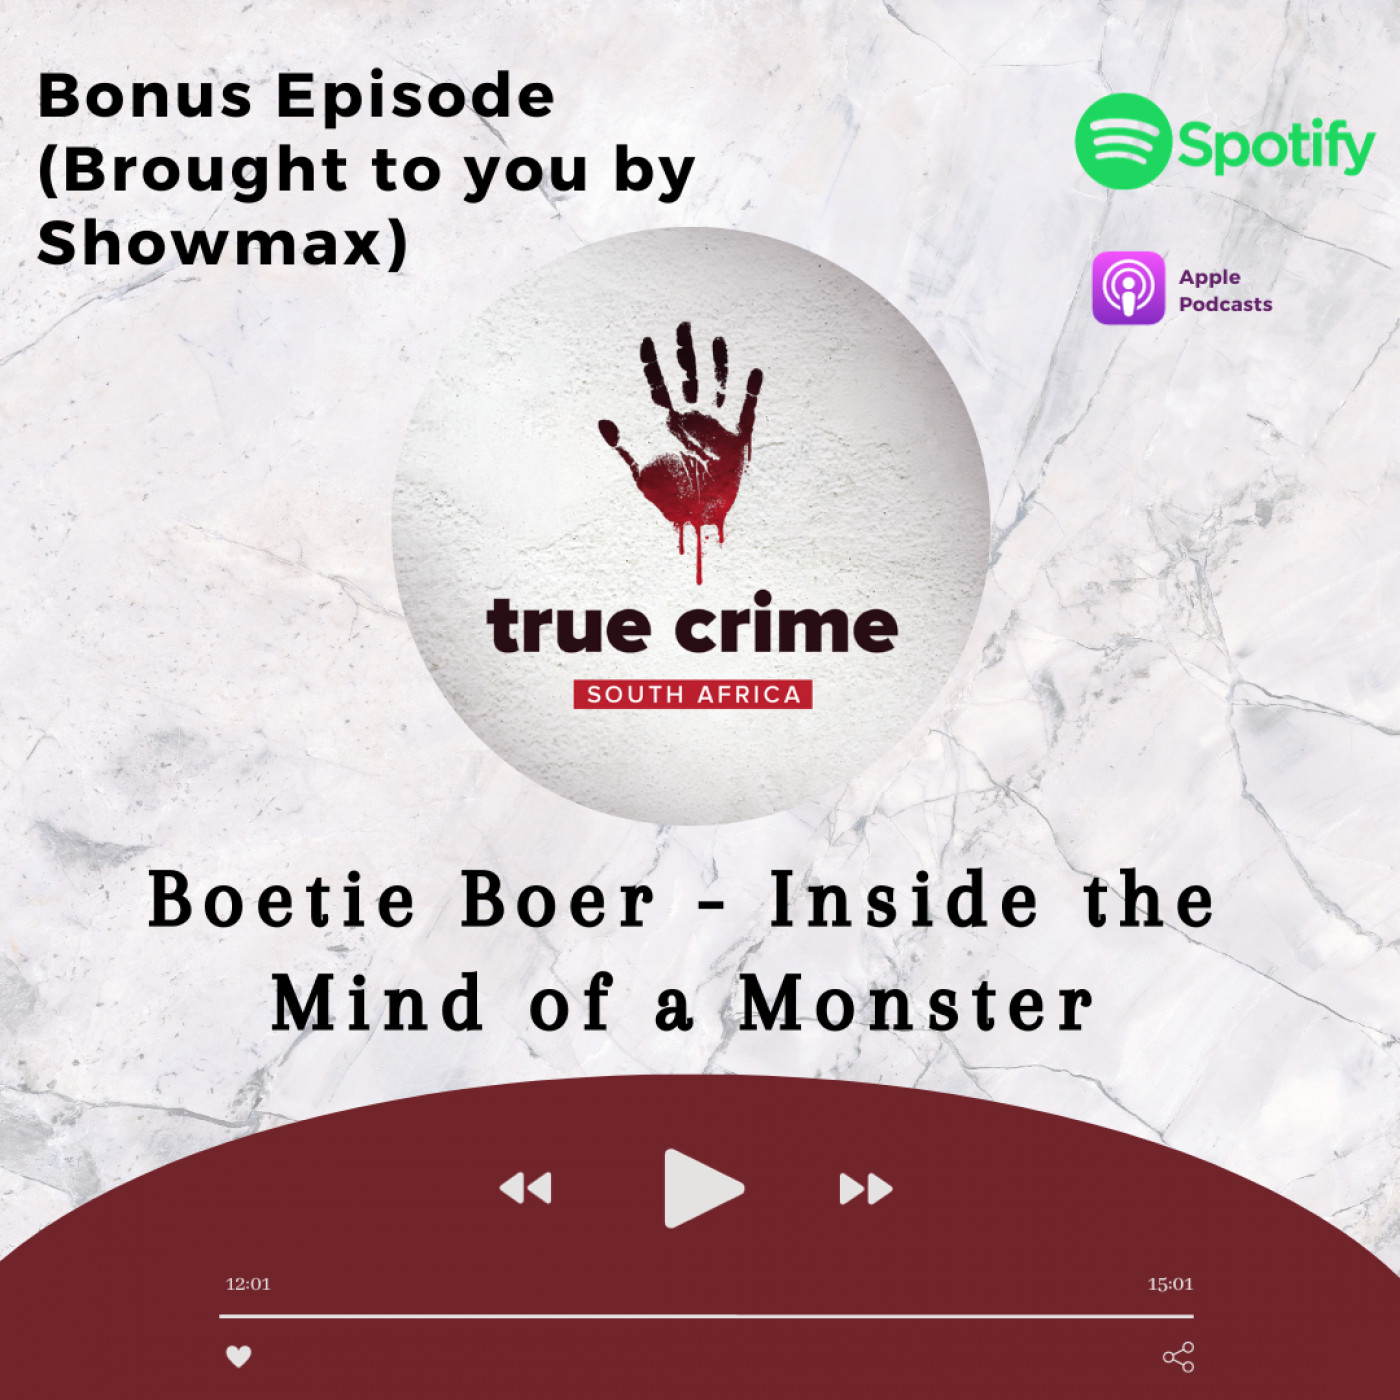 Bonus Episode (Brought to you by Showmax) - Boetie Boer: Inside the Mind of a Monster